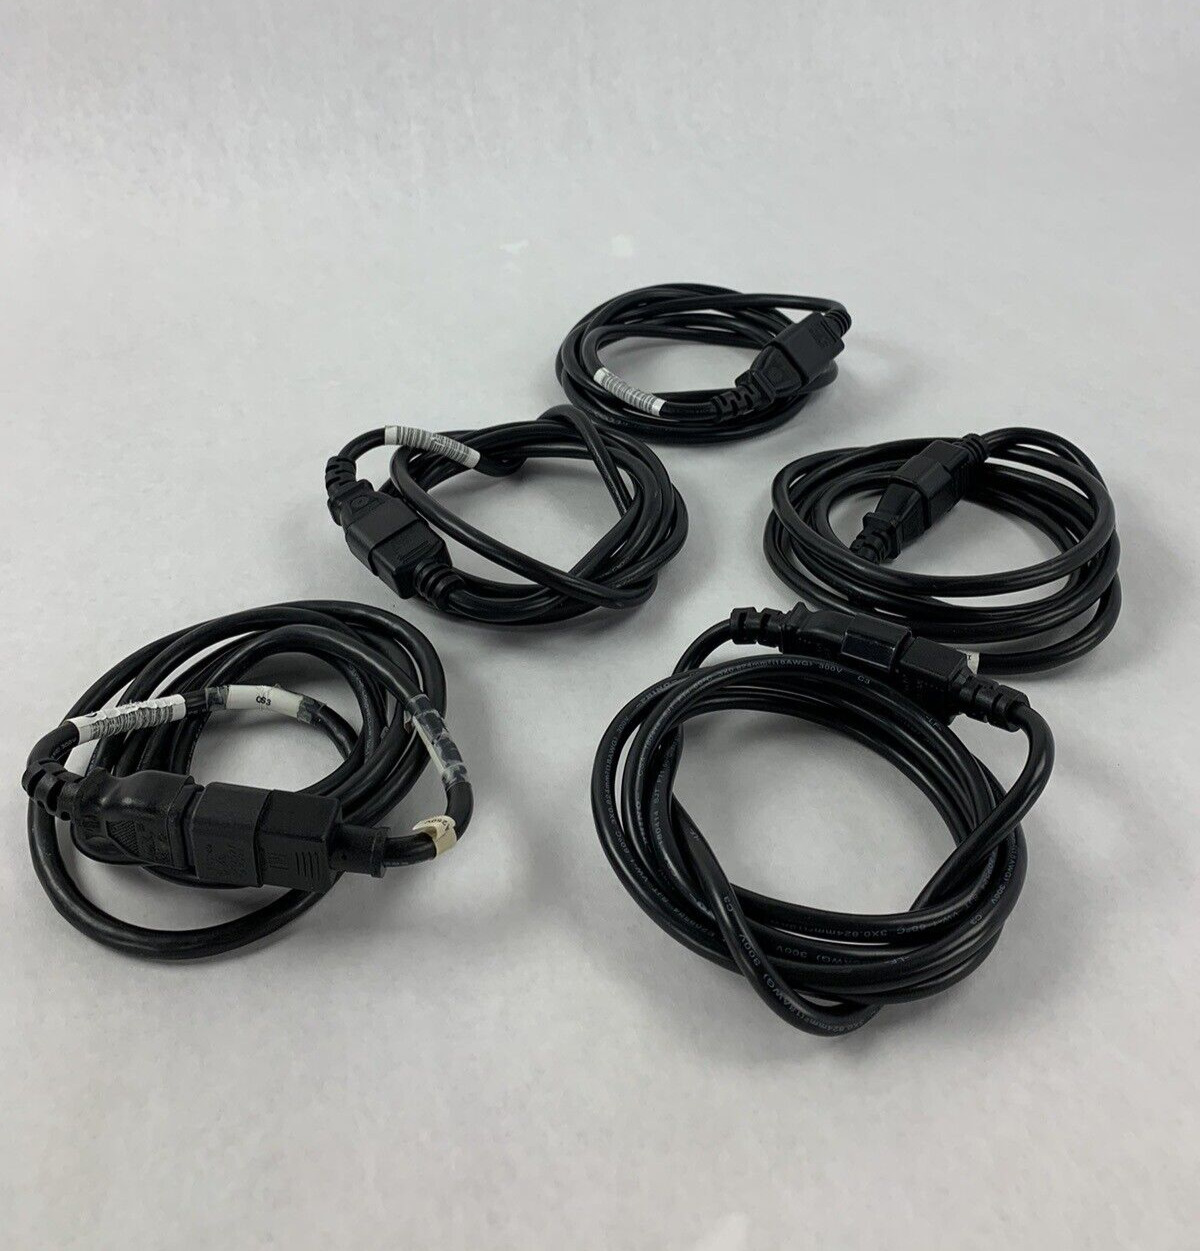 Lot of 5 142263-001 HP IEC to IEC AC 2M (6FT) Power Cable